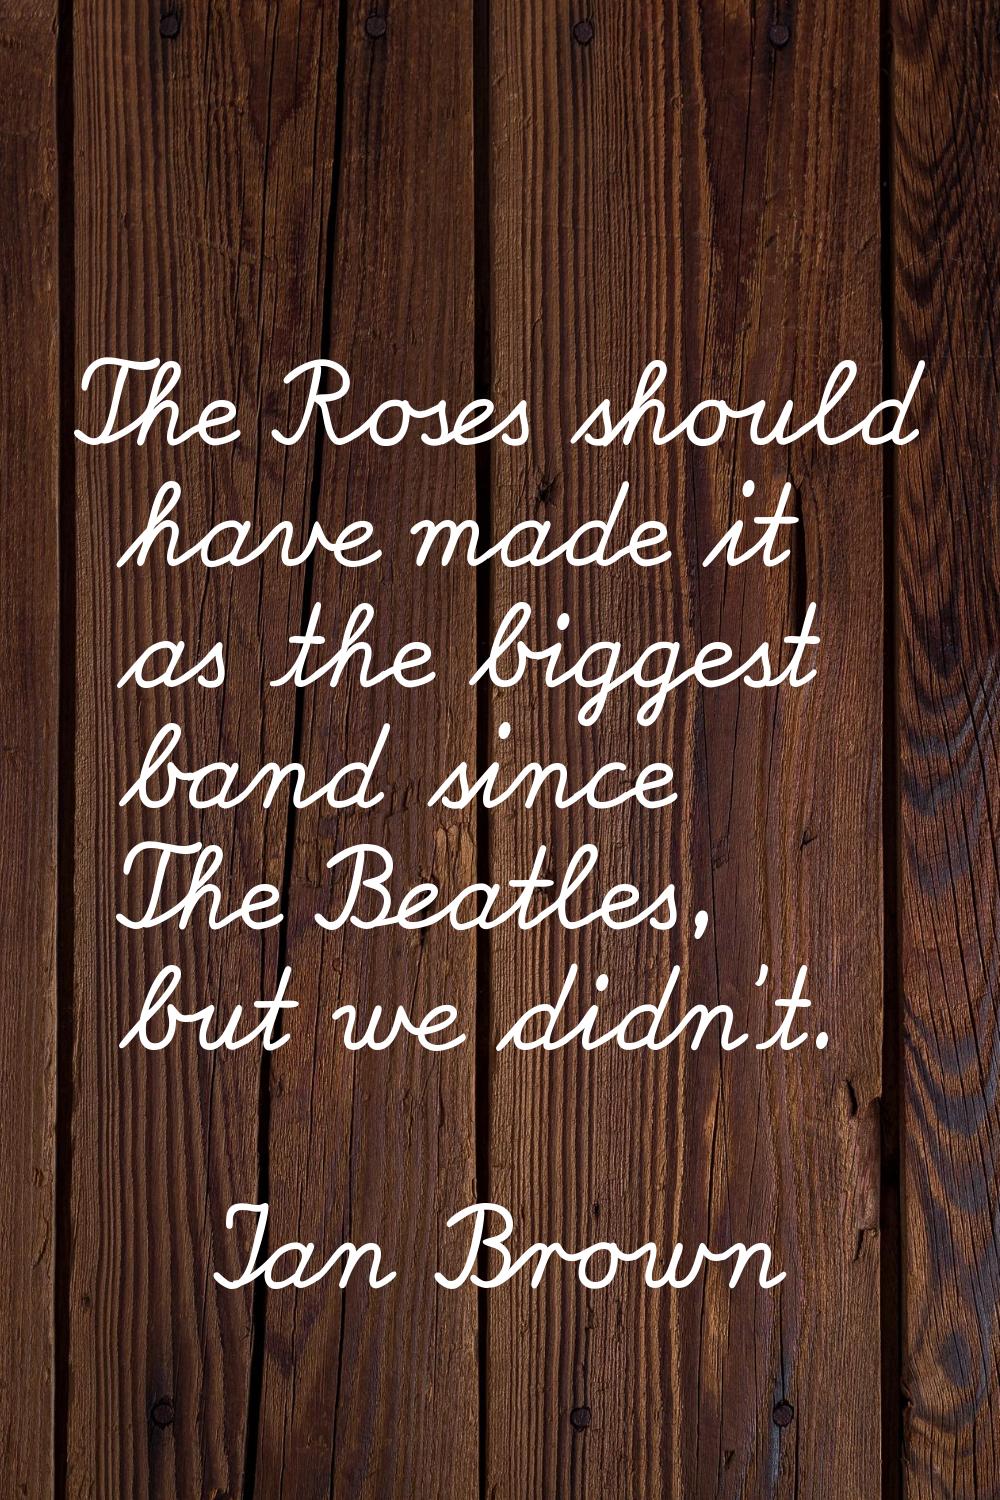 The Roses should have made it as the biggest band since The Beatles, but we didn't.